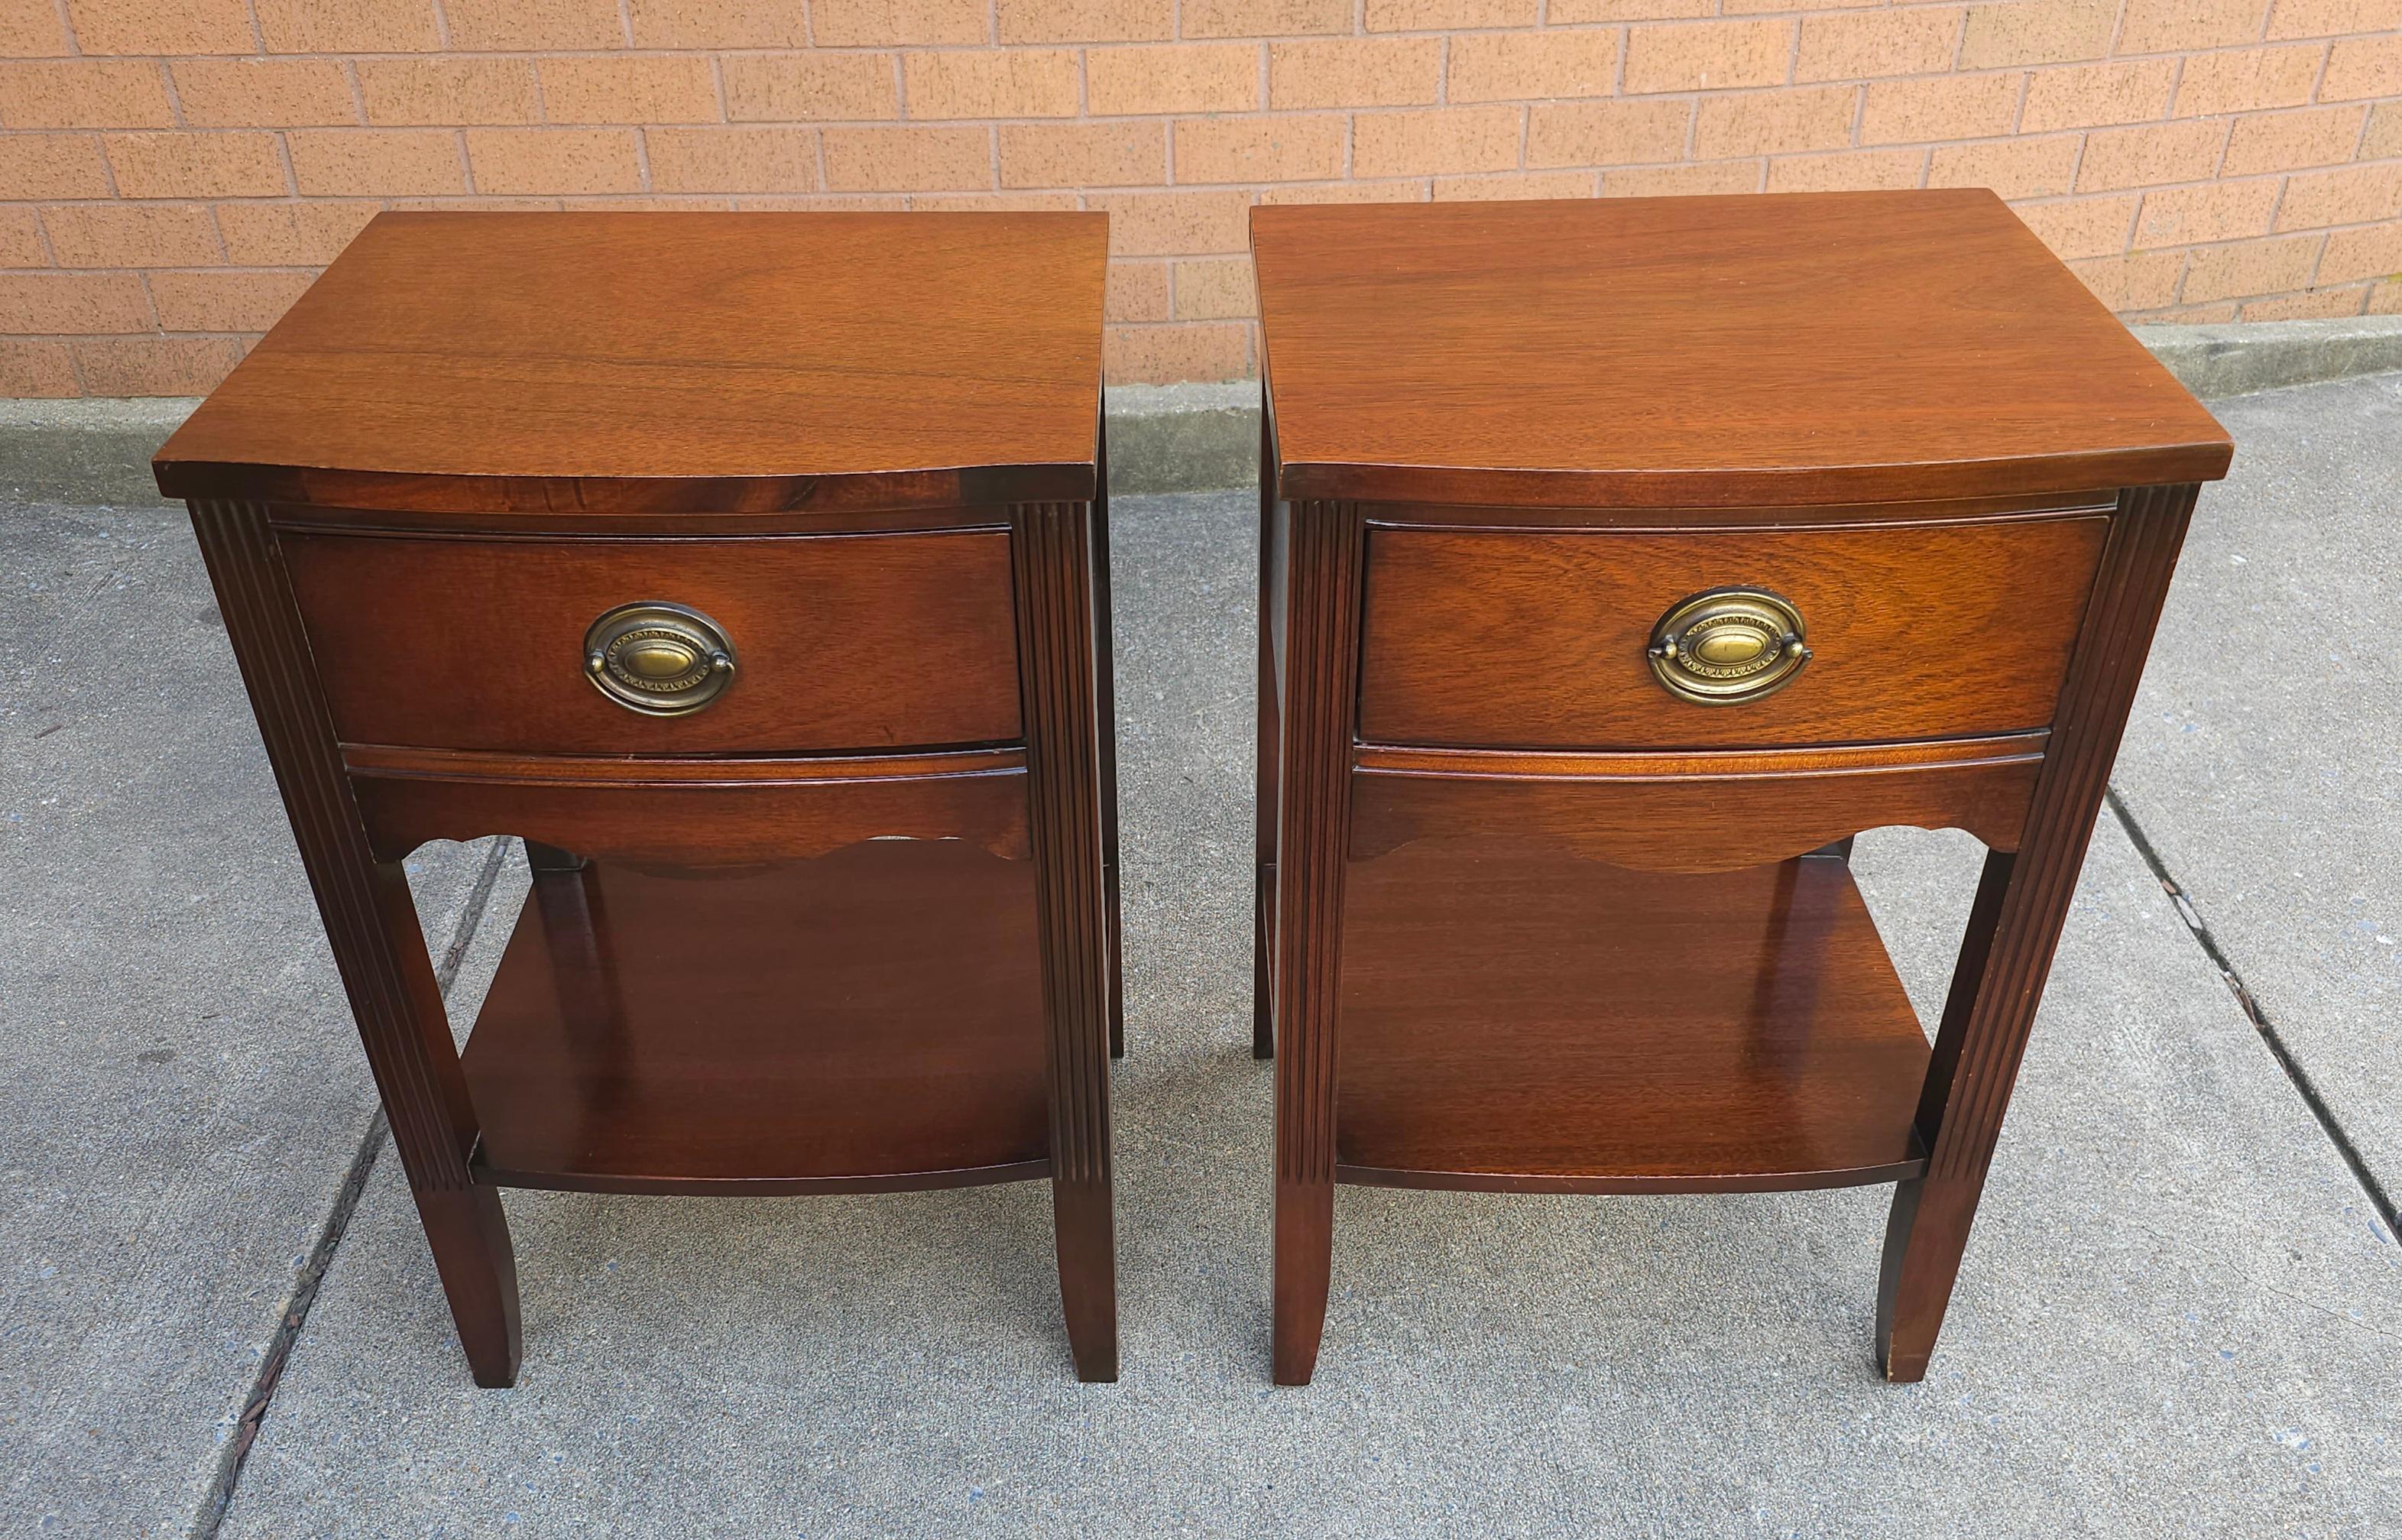 A Pair of Mid Century Federal Style Mahogany Two Tier single drawer Night Stands in good vintage condition.
Measures 18